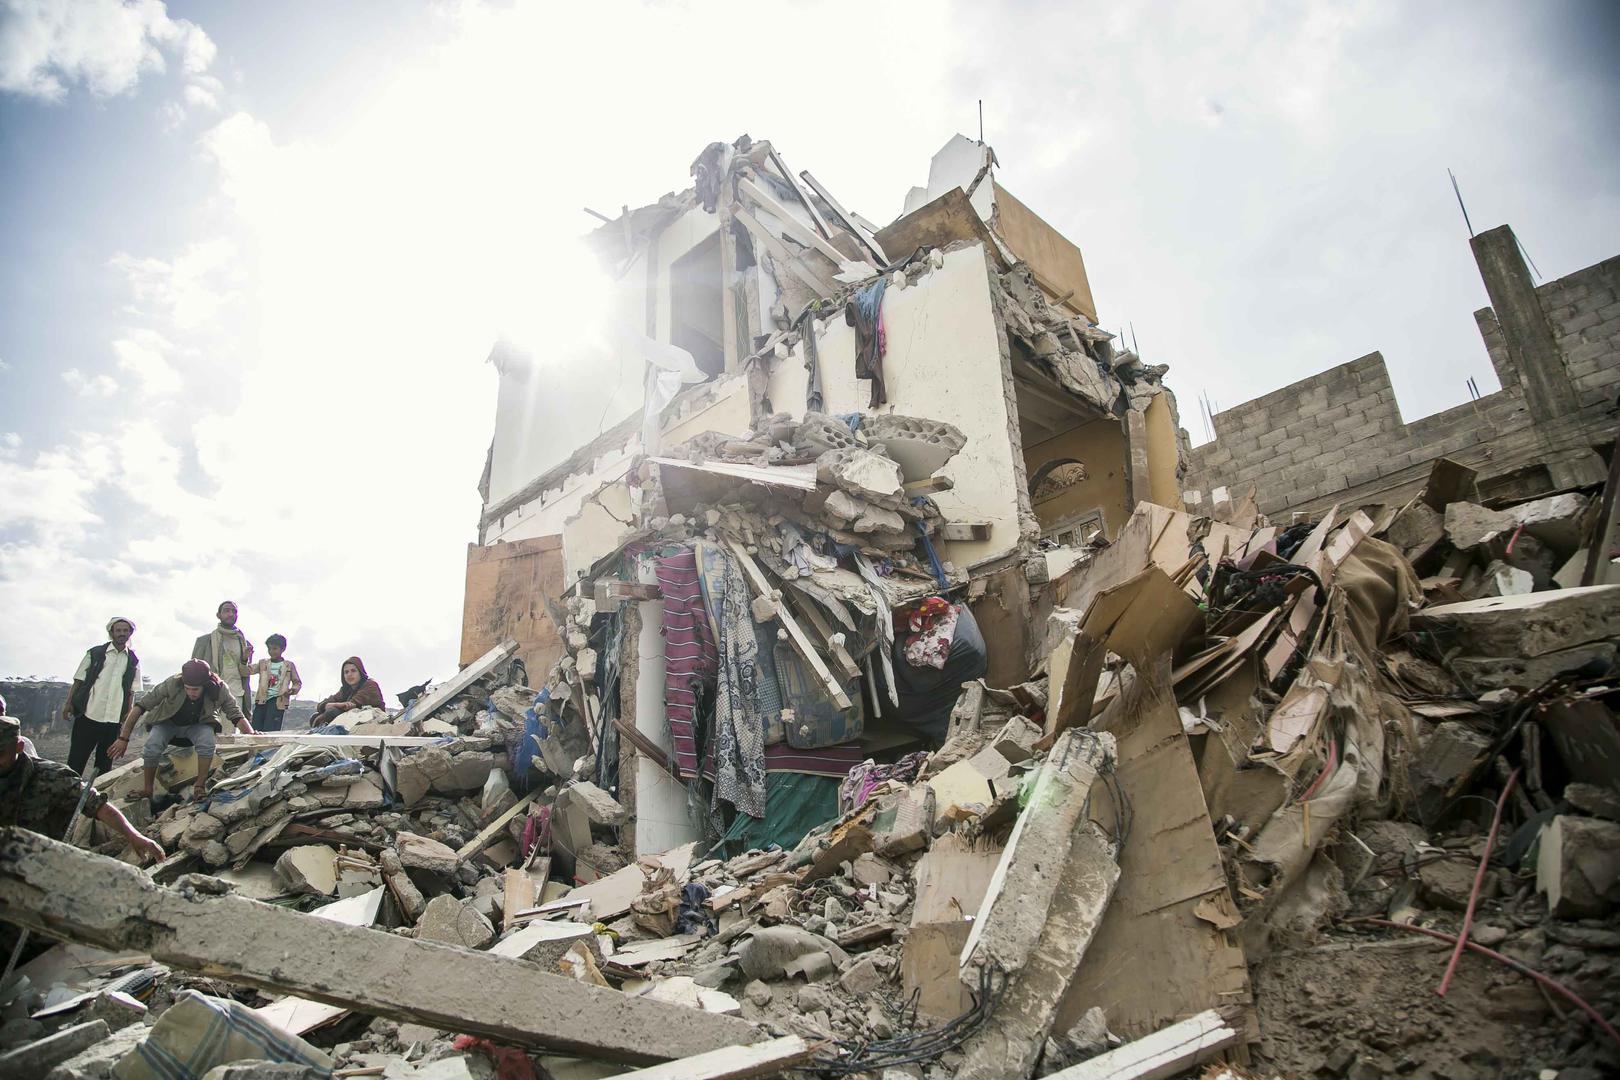 Saudi-led coalition aircraft struck three apartment buildings in Sanaa on August 25, 2017, killing at least 16 civilians, including seven children, and wounding another 17, including eight children. After an international outcry, the coalition admitted to carrying out the attack, but provided no details on the coalition members involved in the attack.